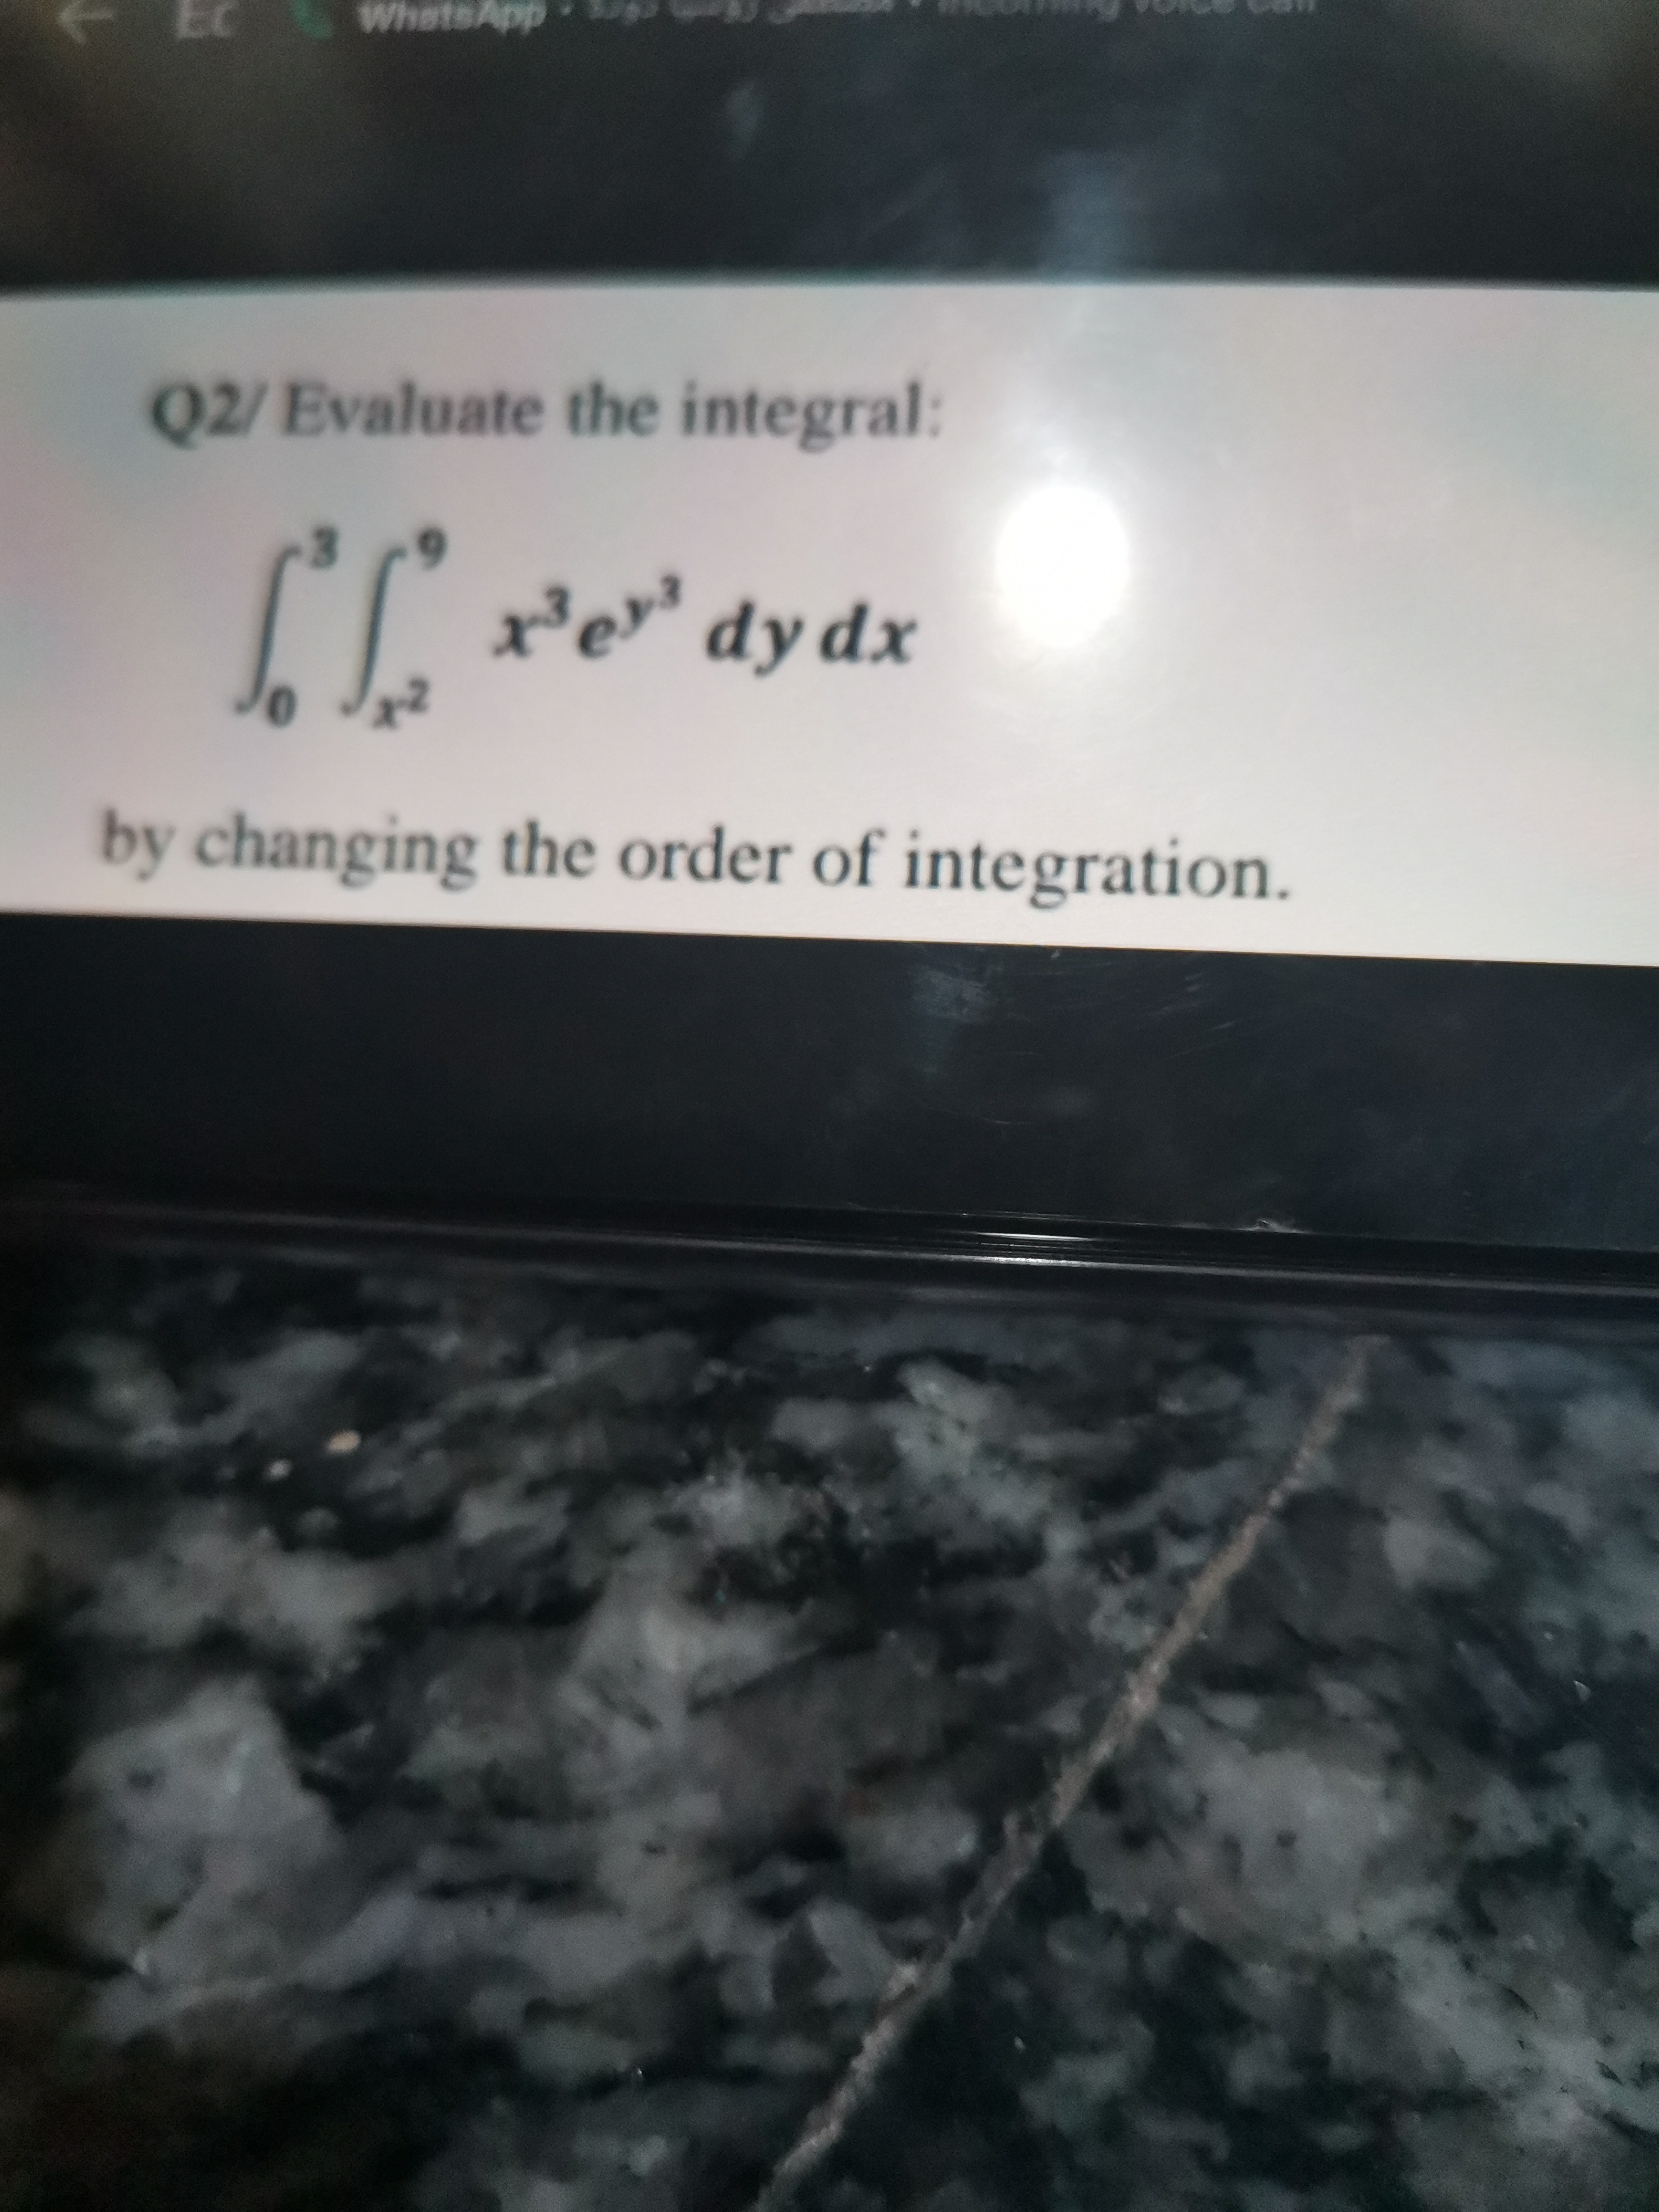 Q2/ Evaluate the integral:
6.
xe' dy dx
by changing the order of integration.
